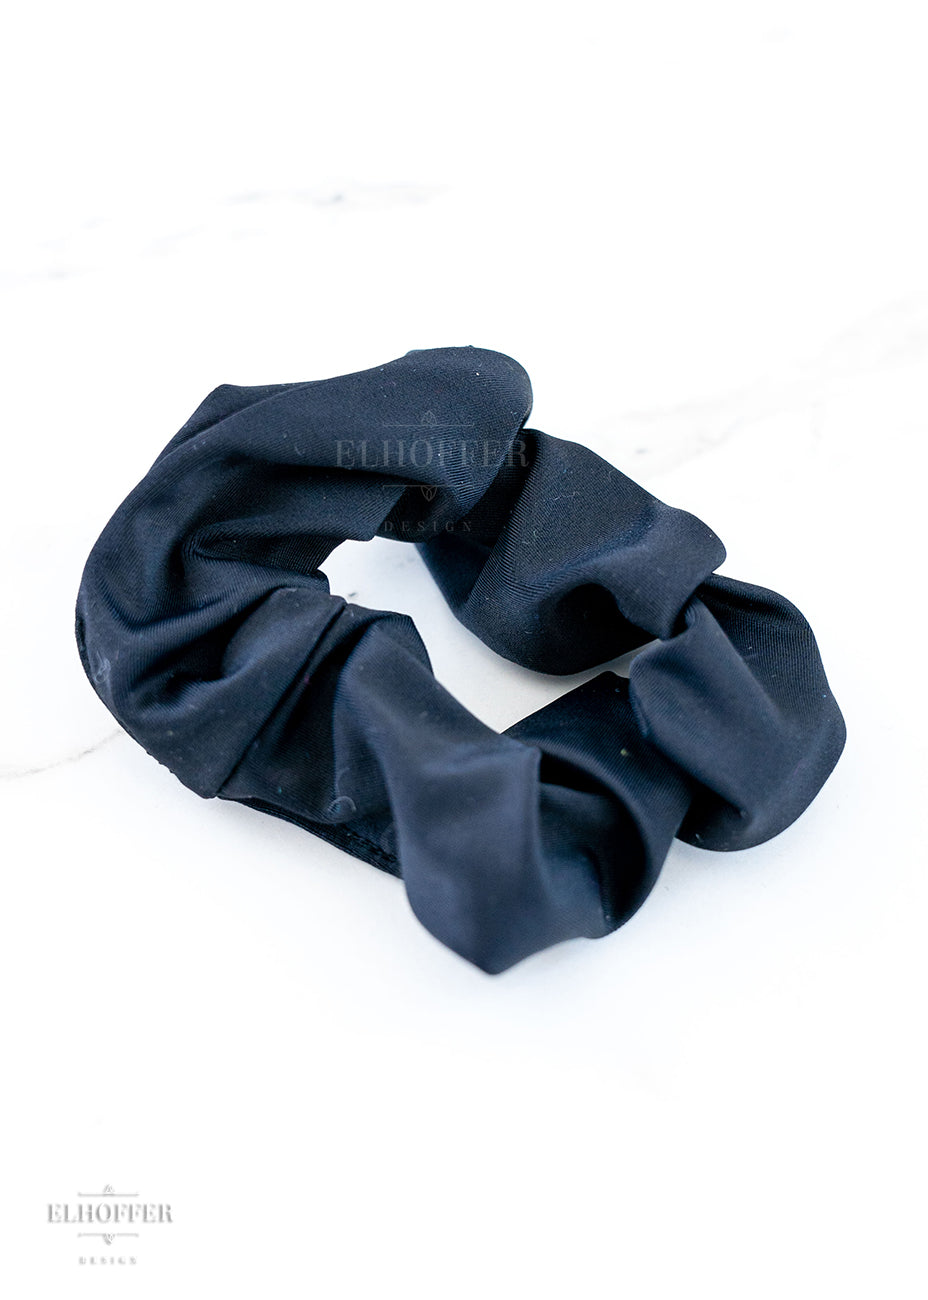 A solid black scrunchie on a marbled white background.